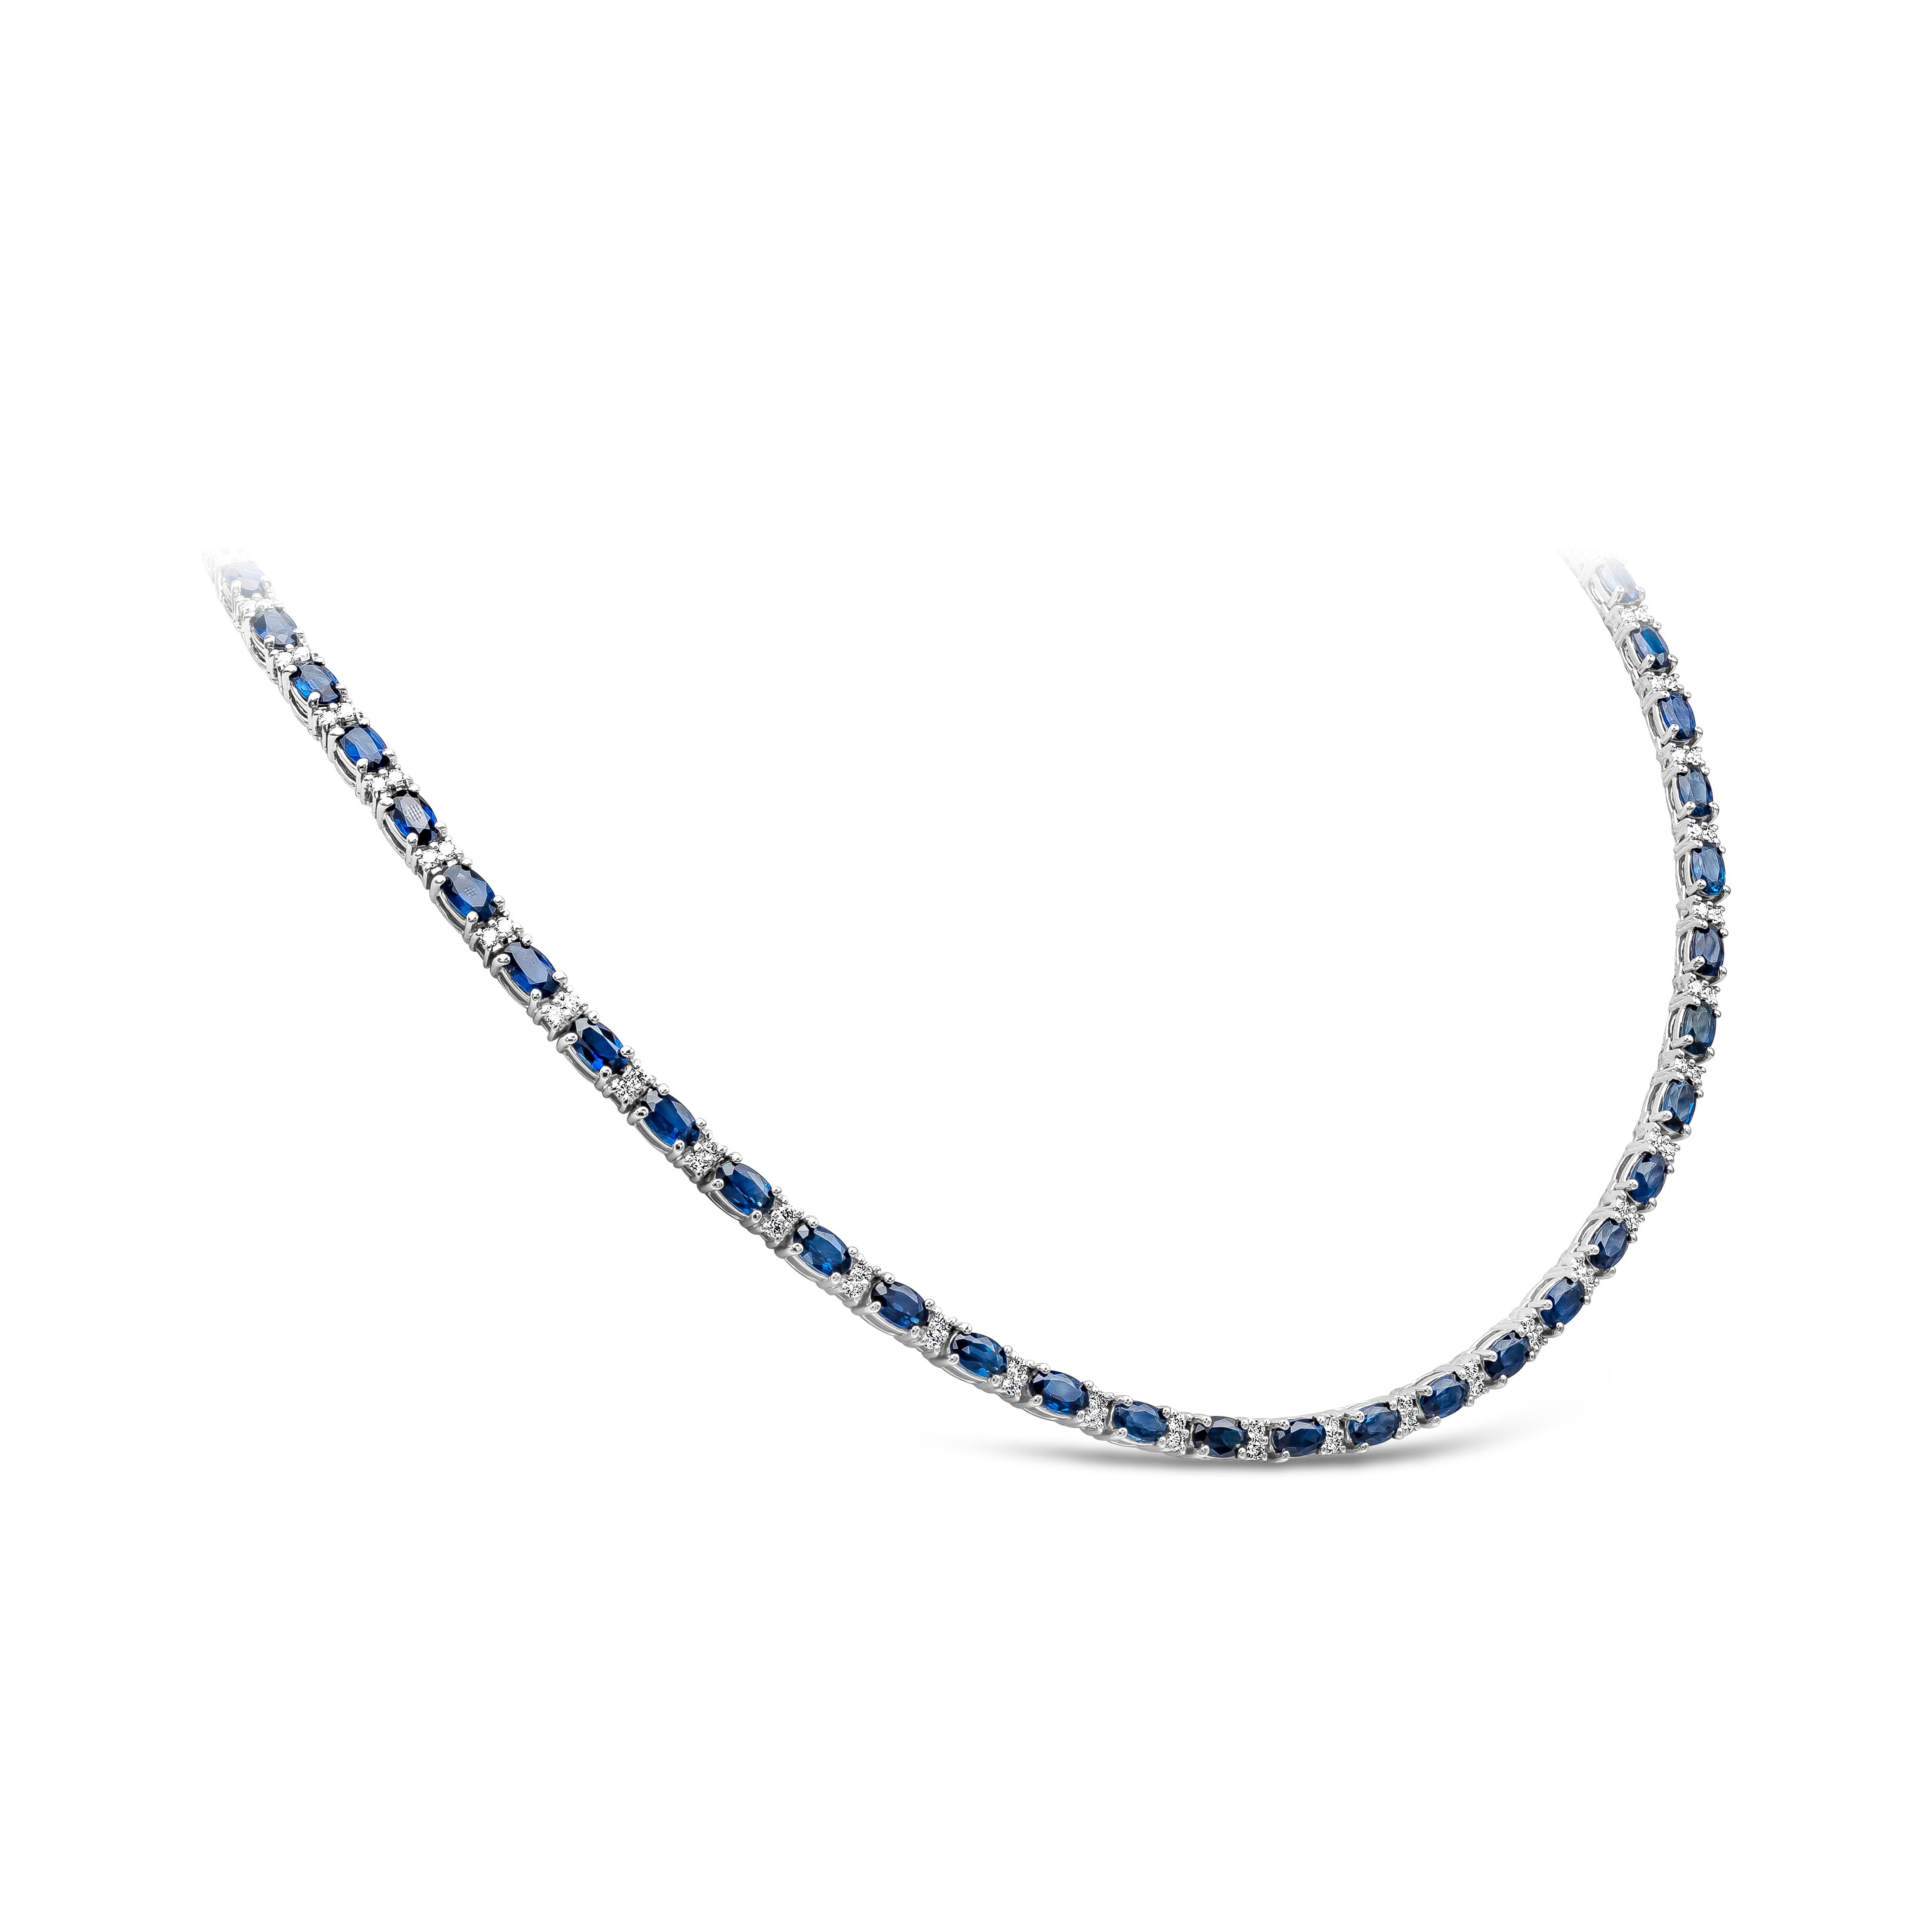 An incredibly color-rich tennis necklace showcasing 17.80 carats total of oval cut blue sapphire, each elegantly spaced by two round brilliant diamonds weighing 1.61 carats total. Made in 14k white gold. Approximately 16 inches in length & can be